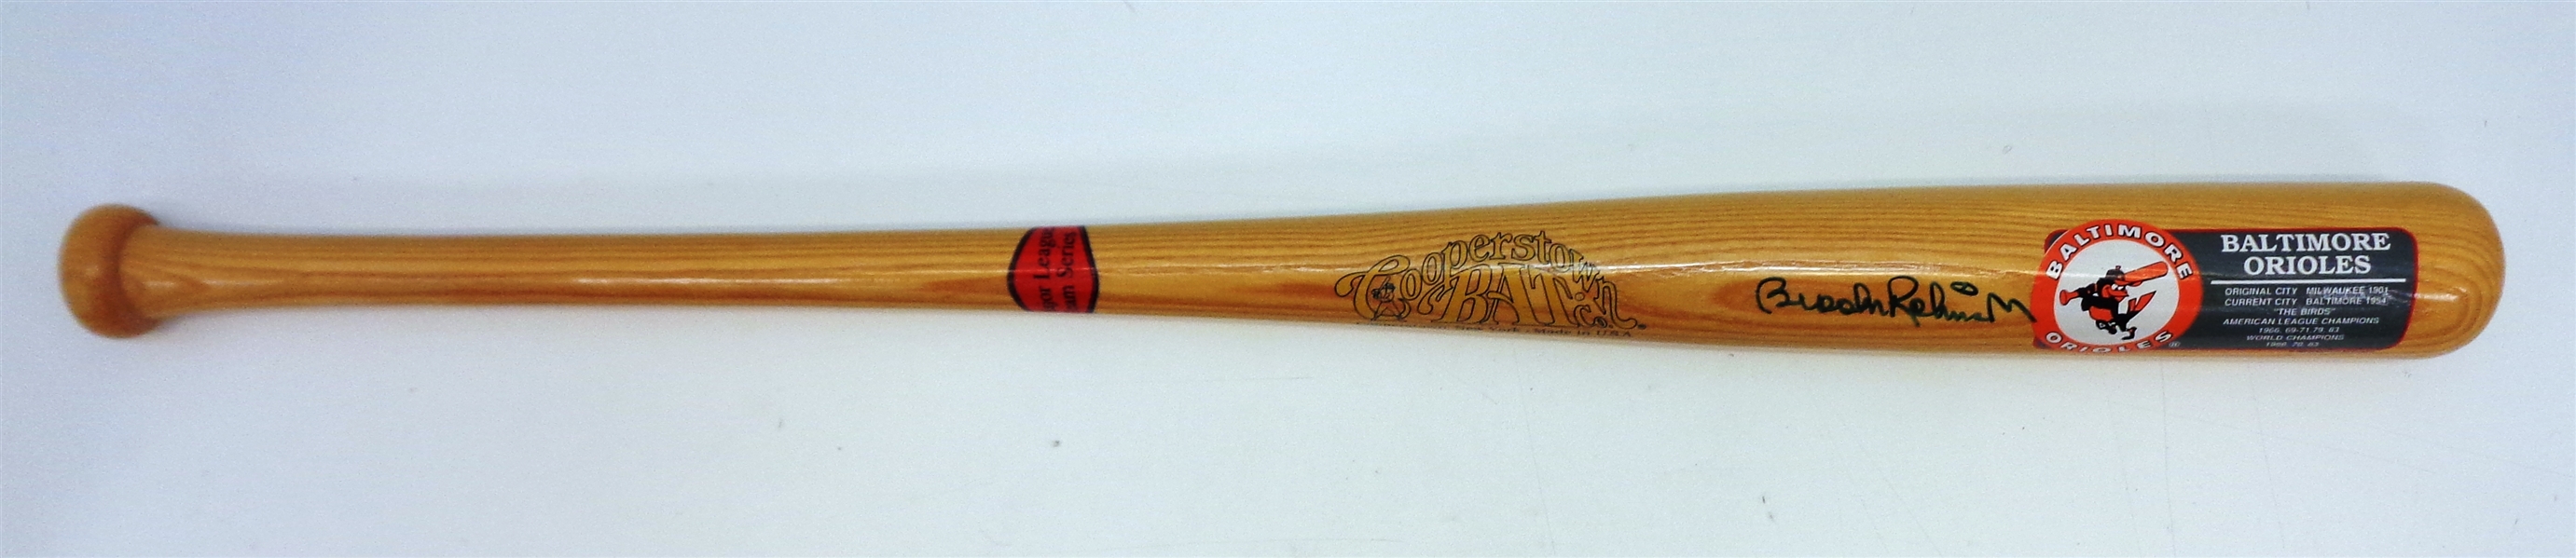 Brooks Robinson Autographed Cooperstown Bat